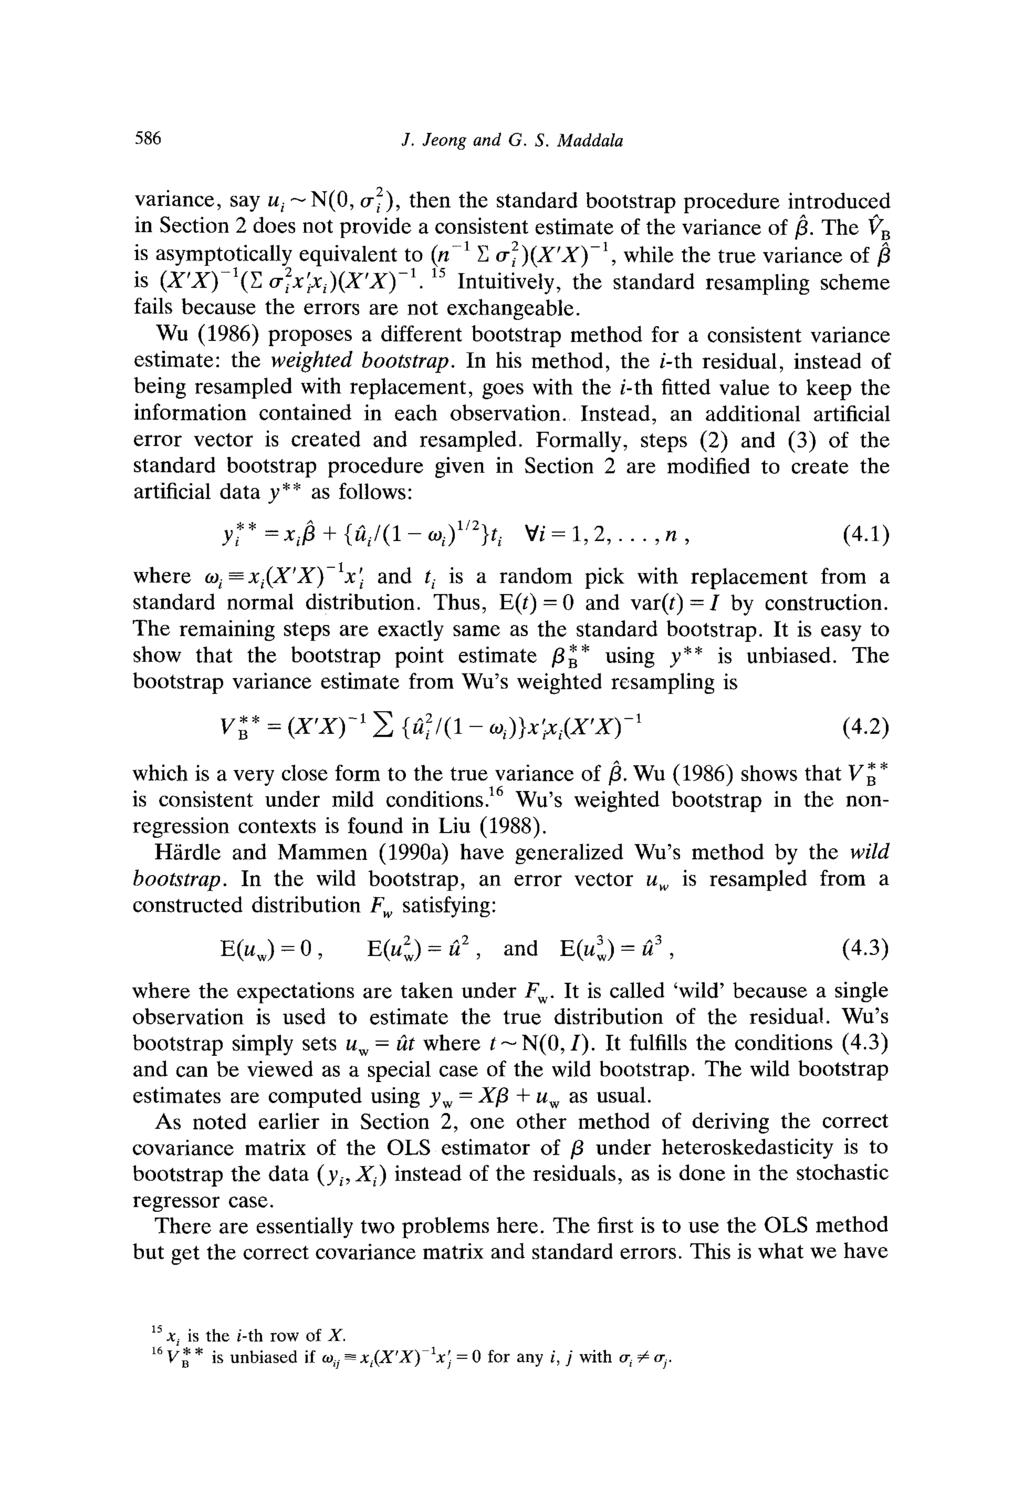 586 J. Jeong and G. S. Maddala variance, say u i -N(0, o-~), then the standard bootstrap procedure introduced in Section 2 does not provide a consistent estimate of the variance of ft.